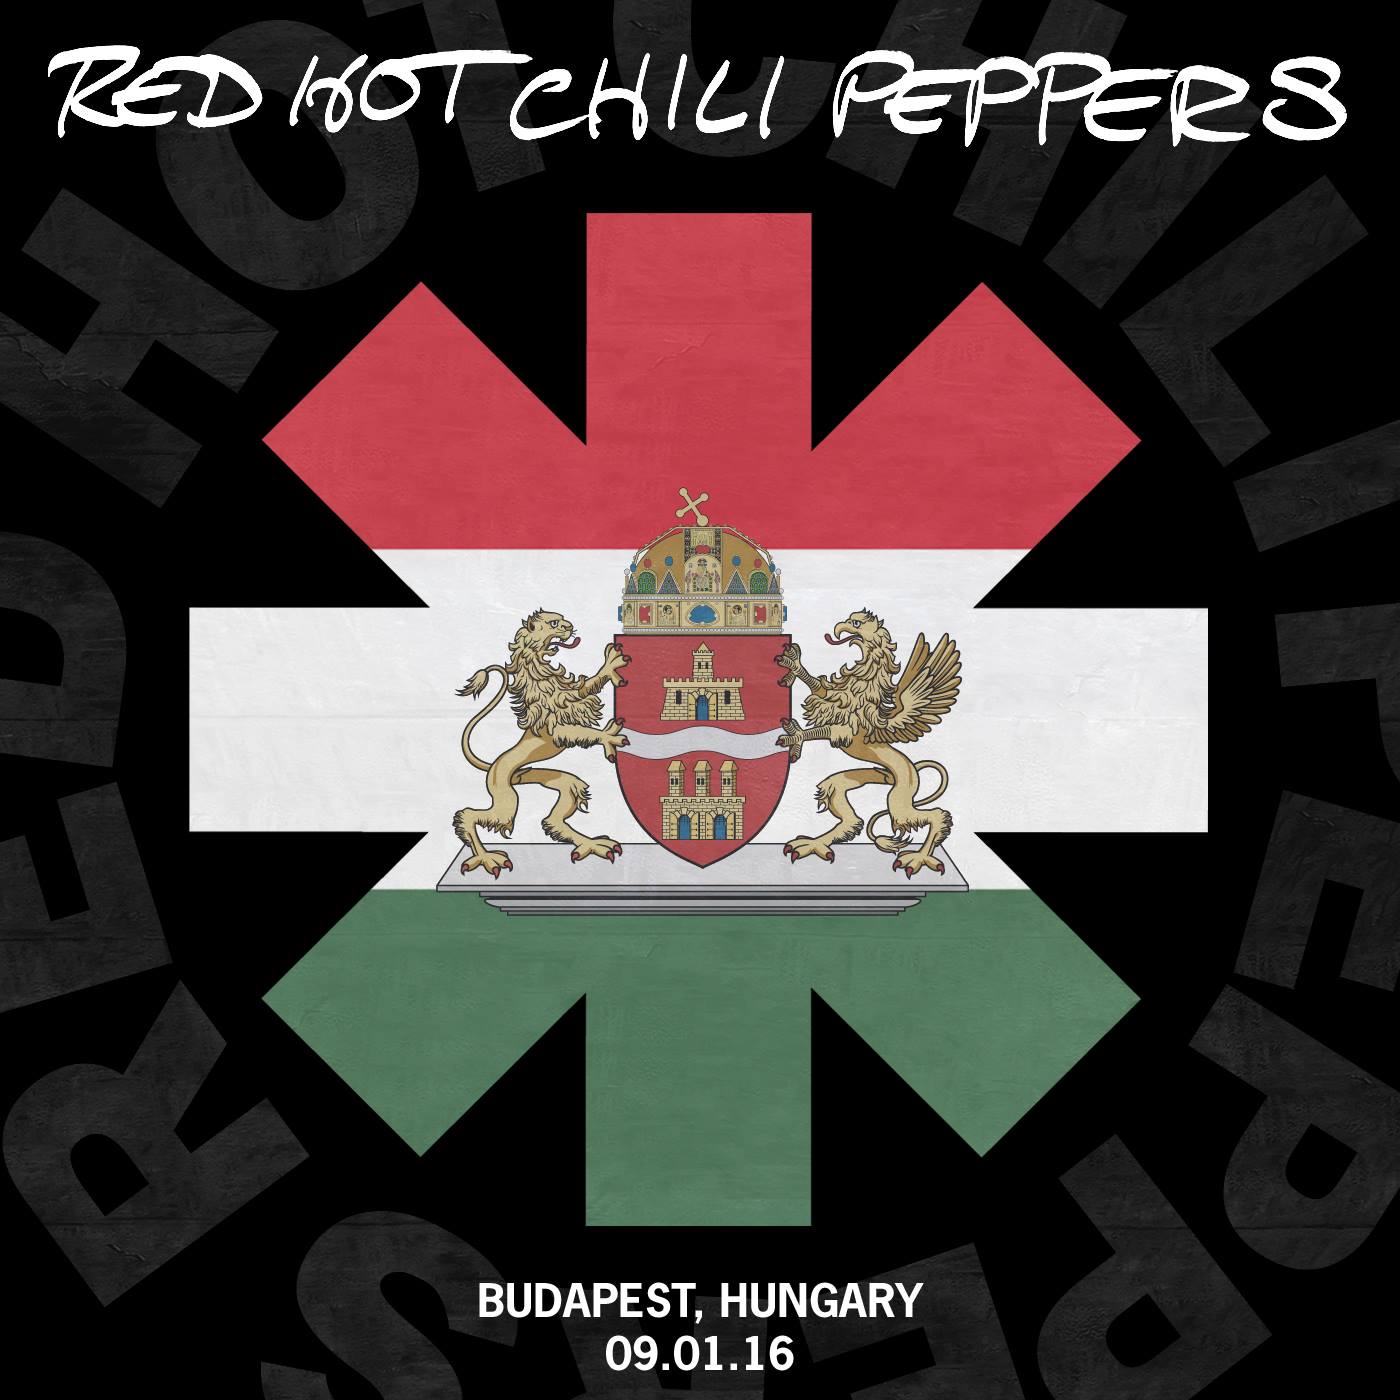 Red Hot Chili Peppers Budapest 2016